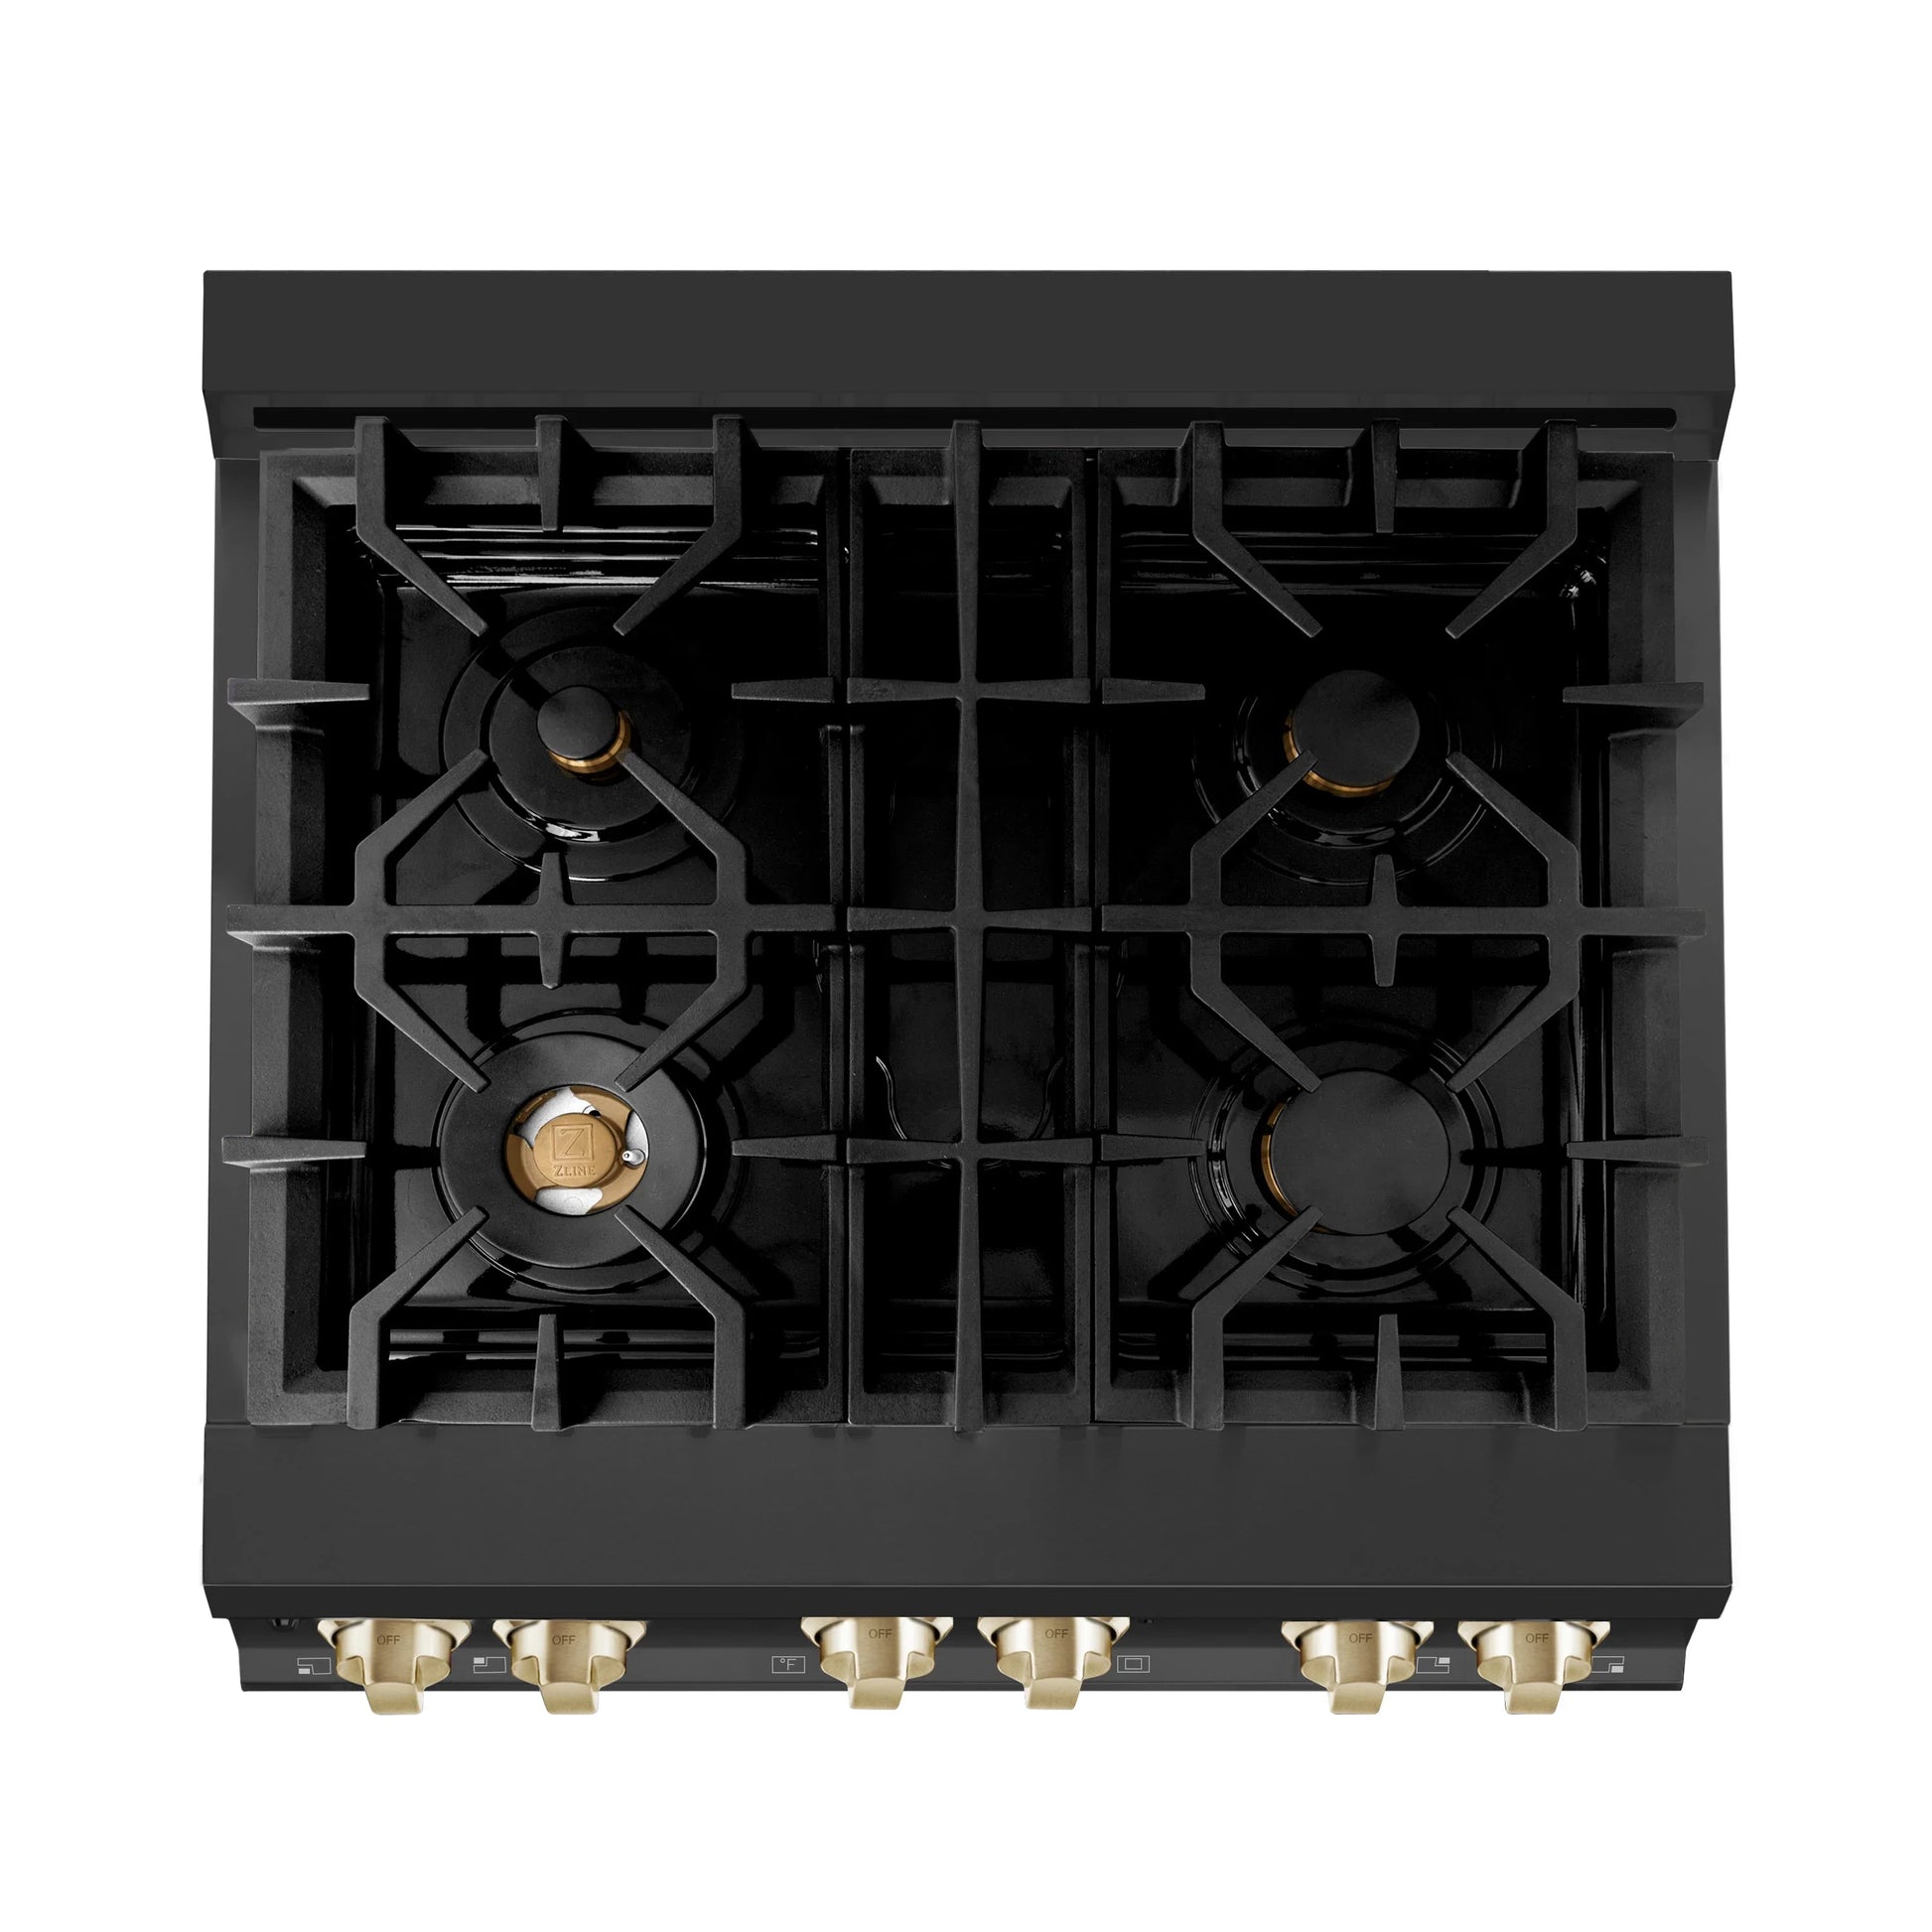 ZLINE Autograph Edition 30" Dual Fuel Range with Gas Stove and Electric Oven - Black Stainless Steel, Gold Accents